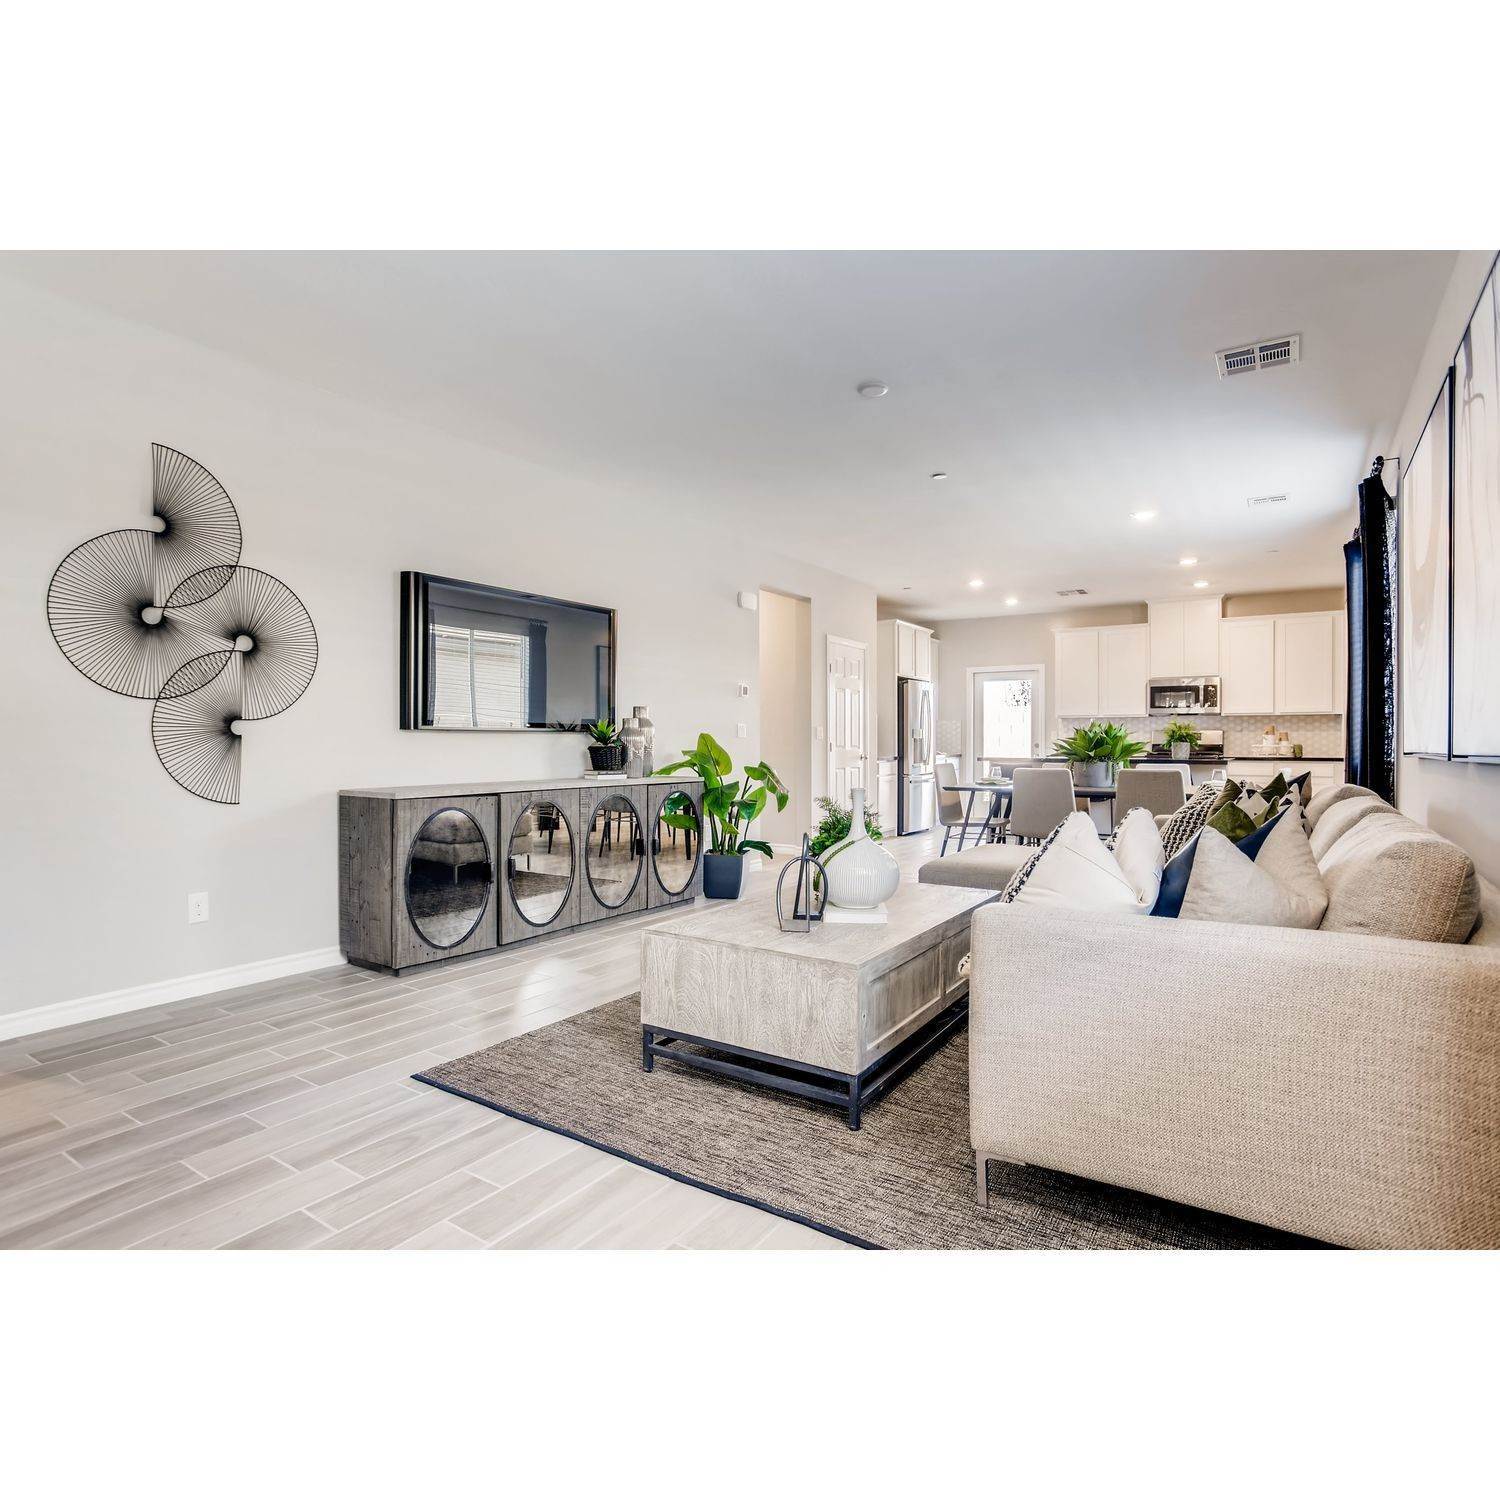 18. Single Family for Sale at Emerson - Orson Collection NV 89052